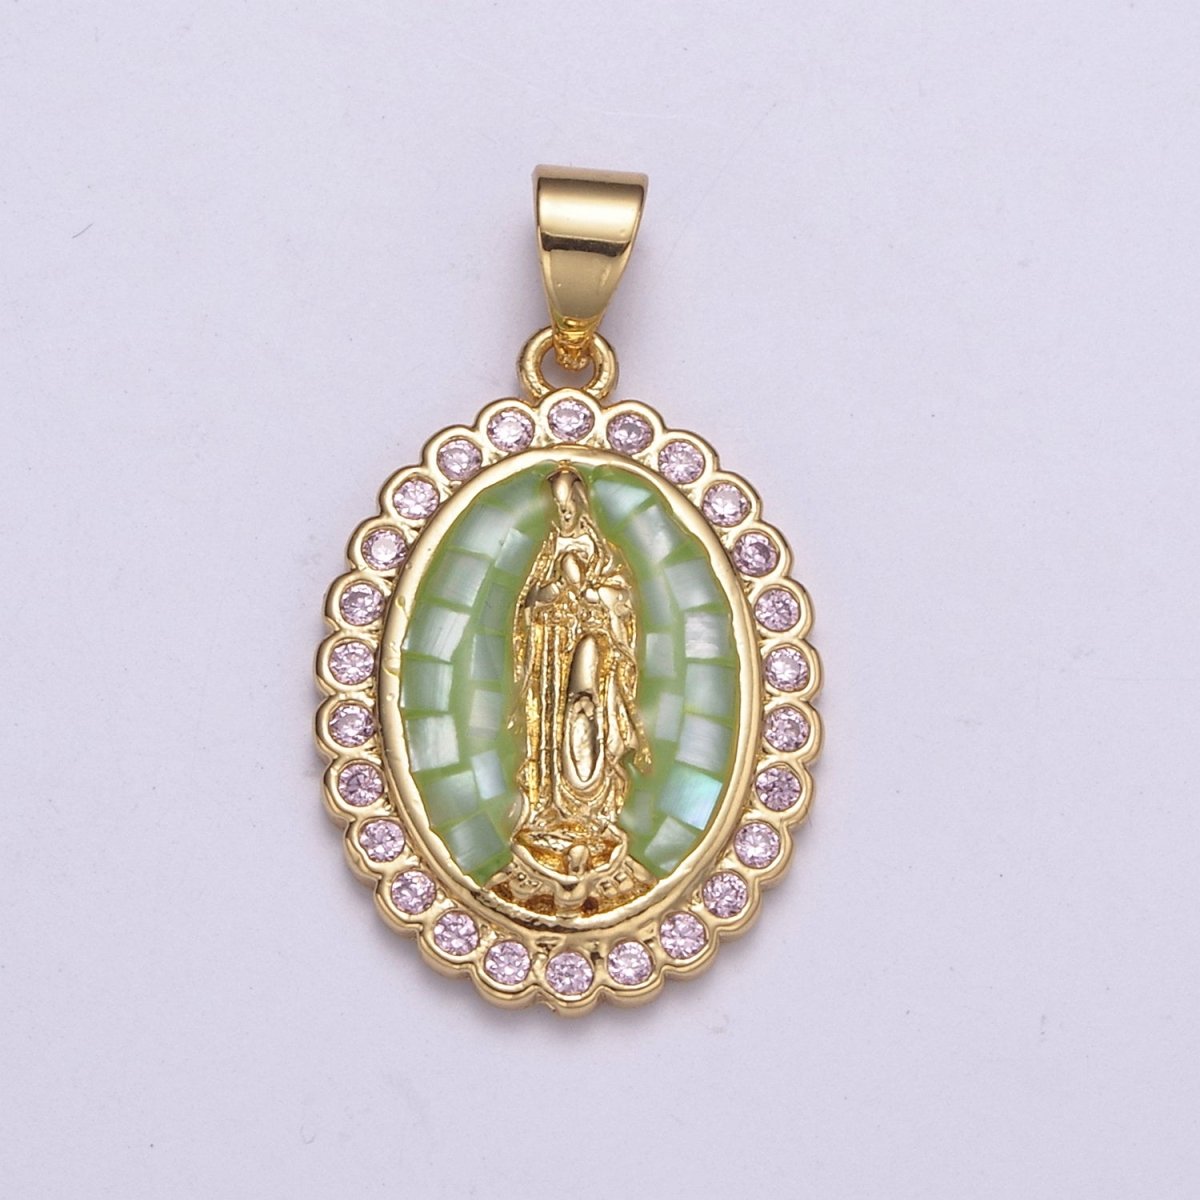 Blue / Green Virgin Mary Charm for Necklace, Dainty Lady Guadalupe Pendant for Religious Jewelry Making Supply in Gold Filled H-057 H-059 - DLUXCA